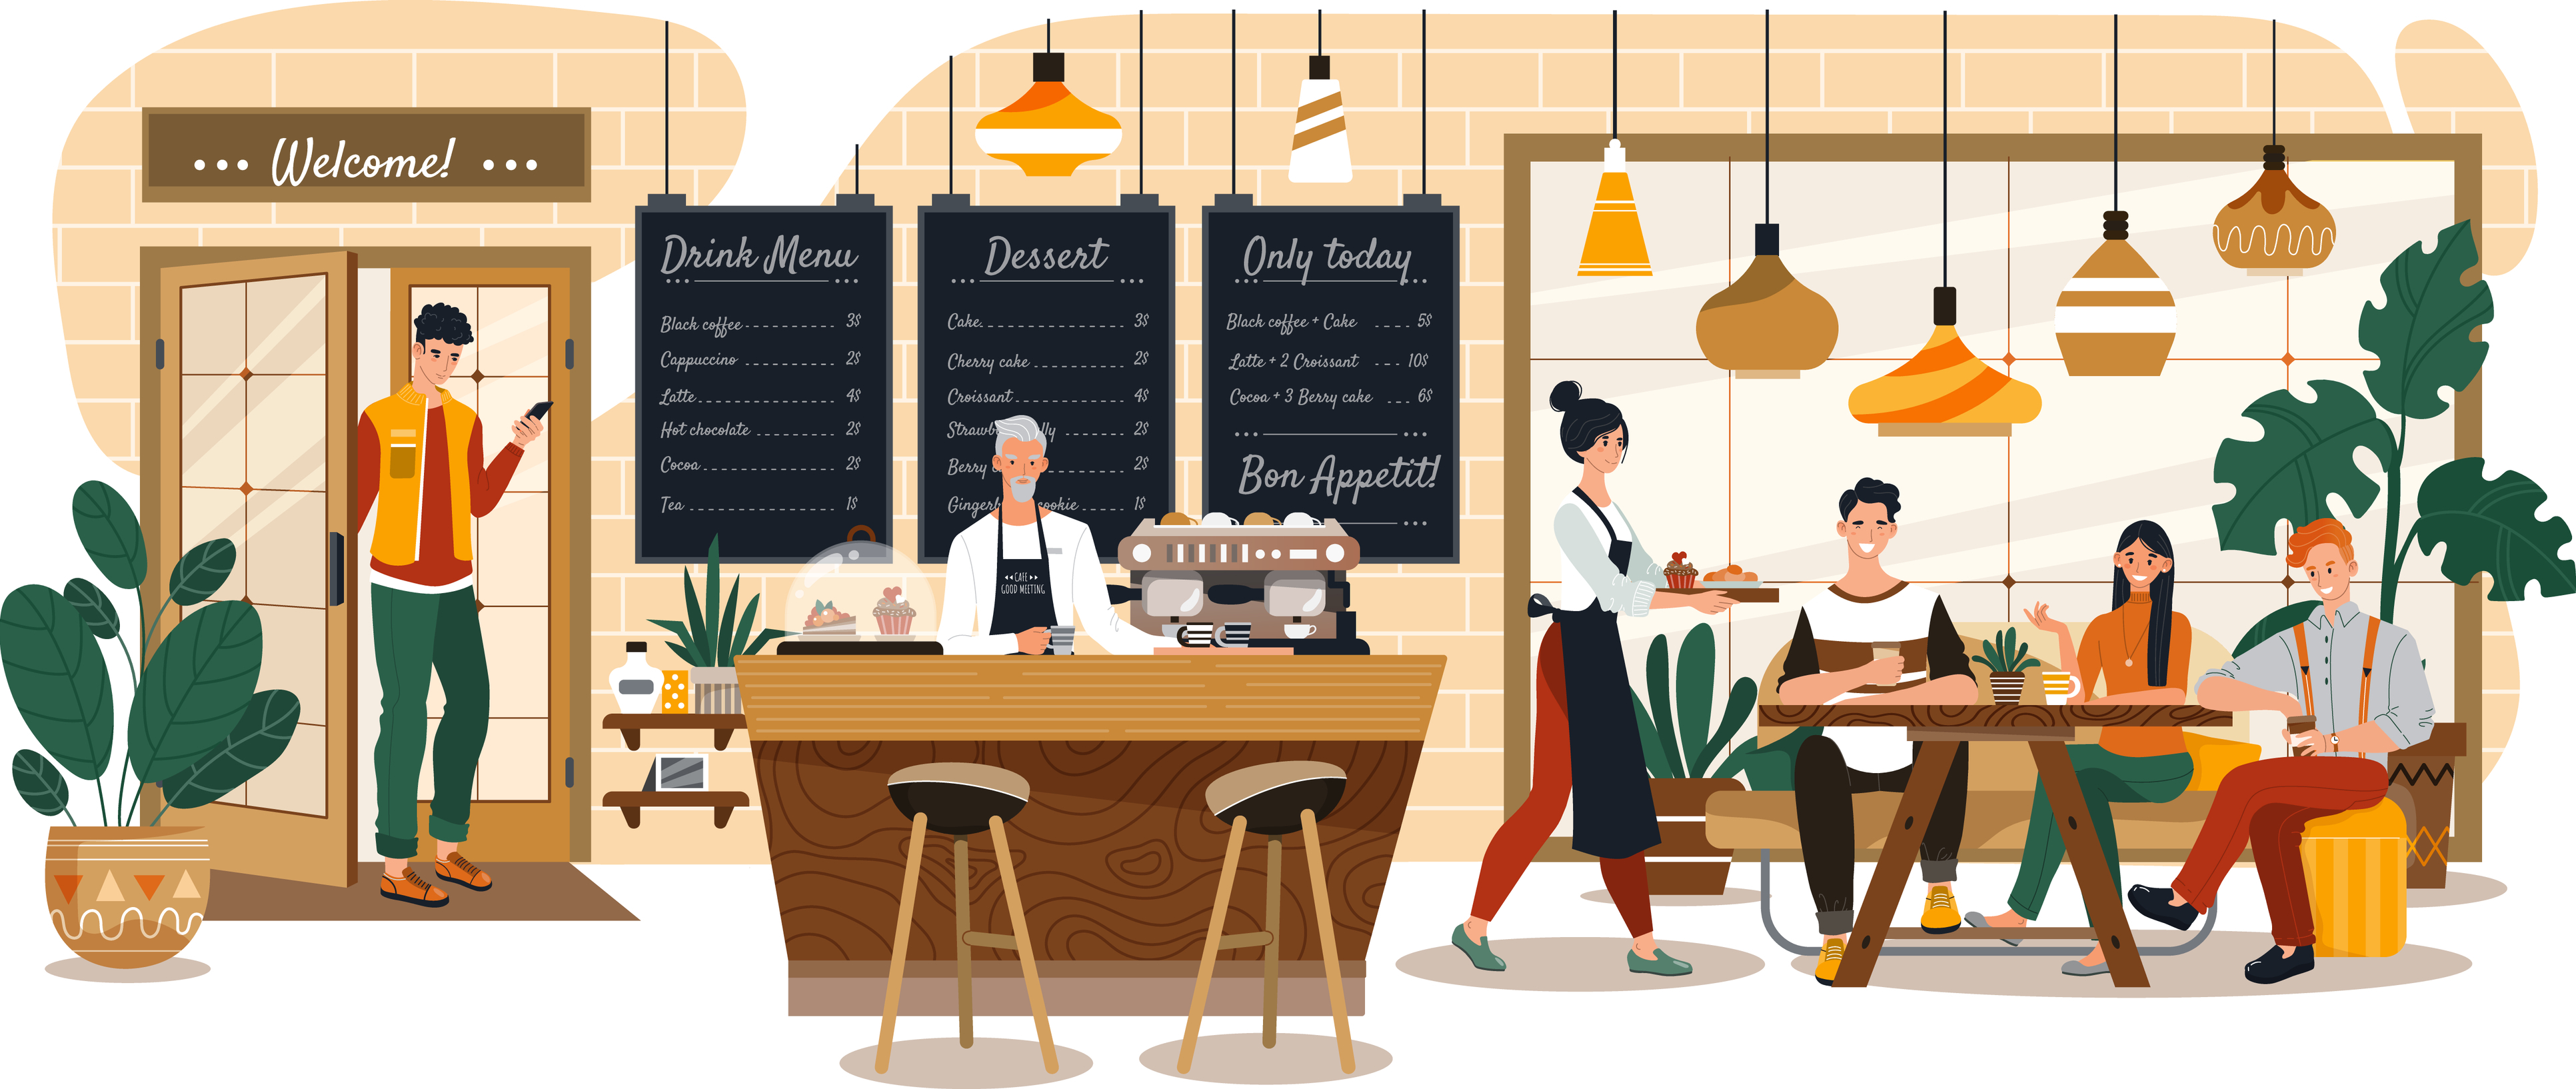 Illustration of several people enjoying a coffee shop